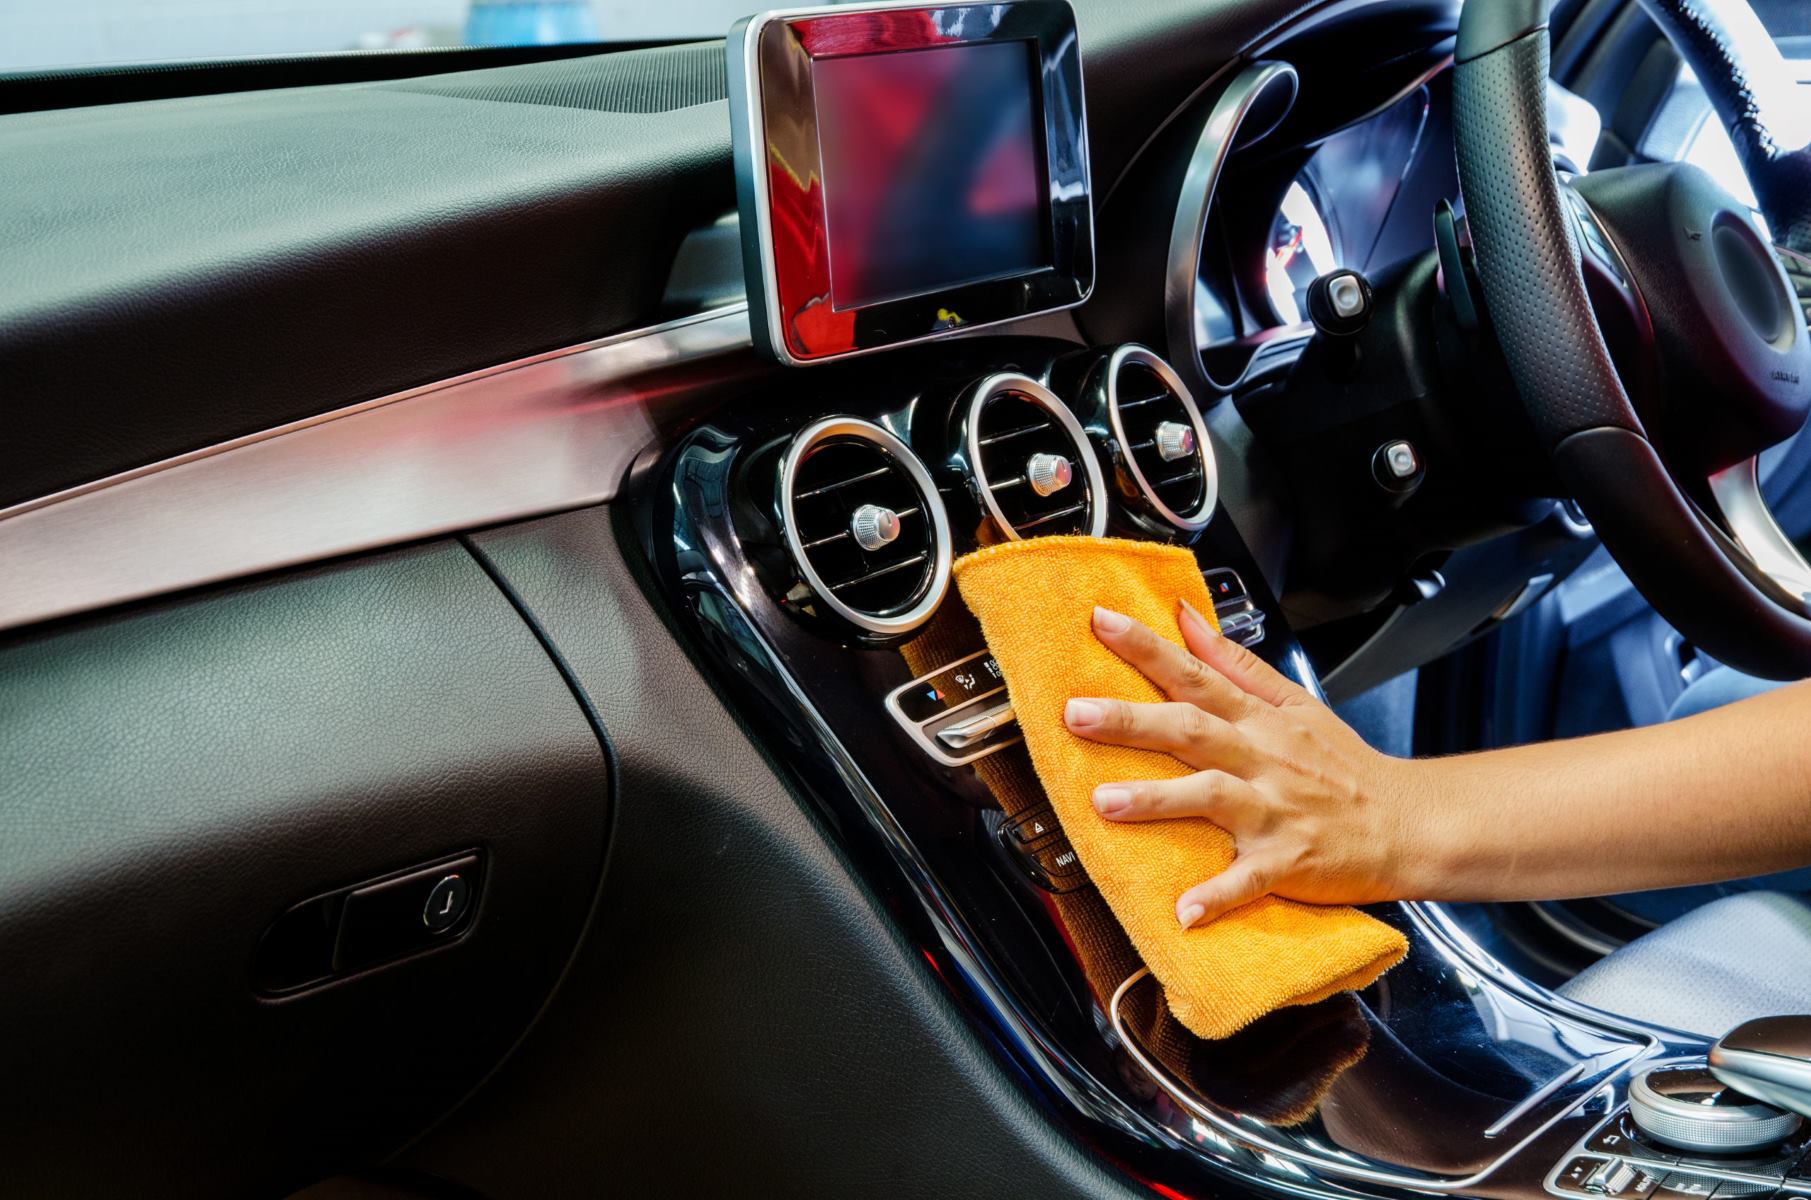 In-Car Display Care: Tips For Cleaning And Maintaining The Touchscreen In Your Car